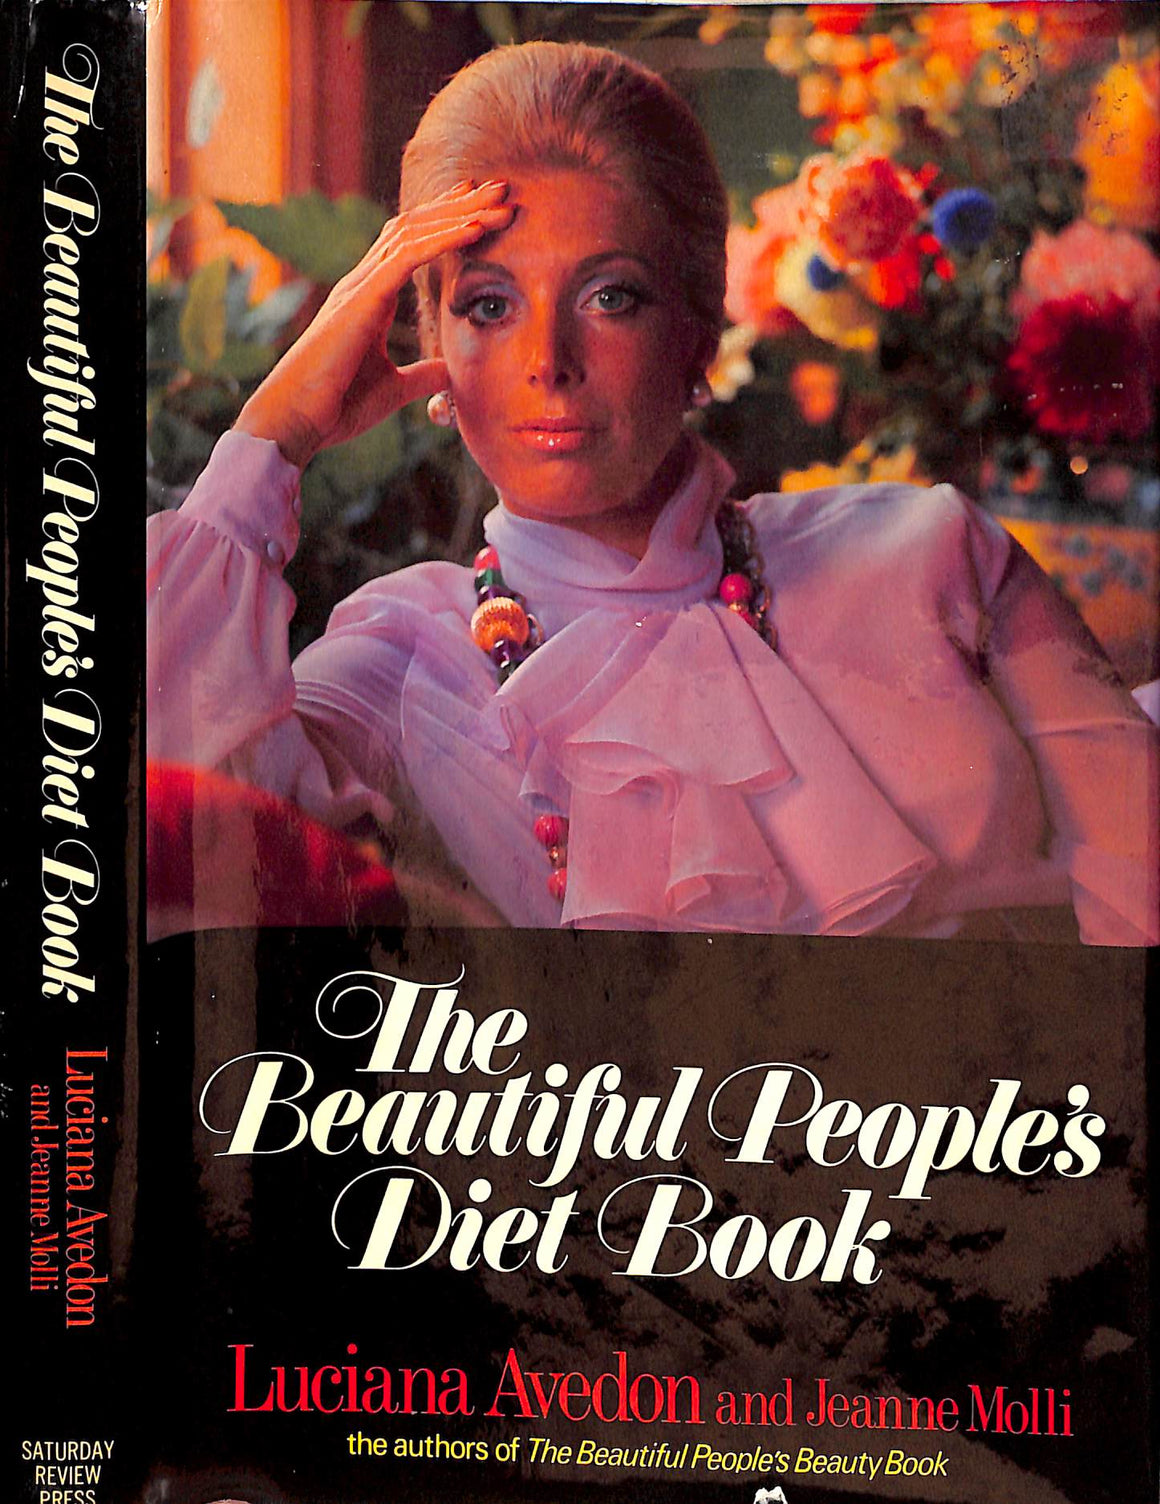 "The Beautiful People's Diet Book" 1973 AVEDON, Luciana and MOLLI, Jeanne